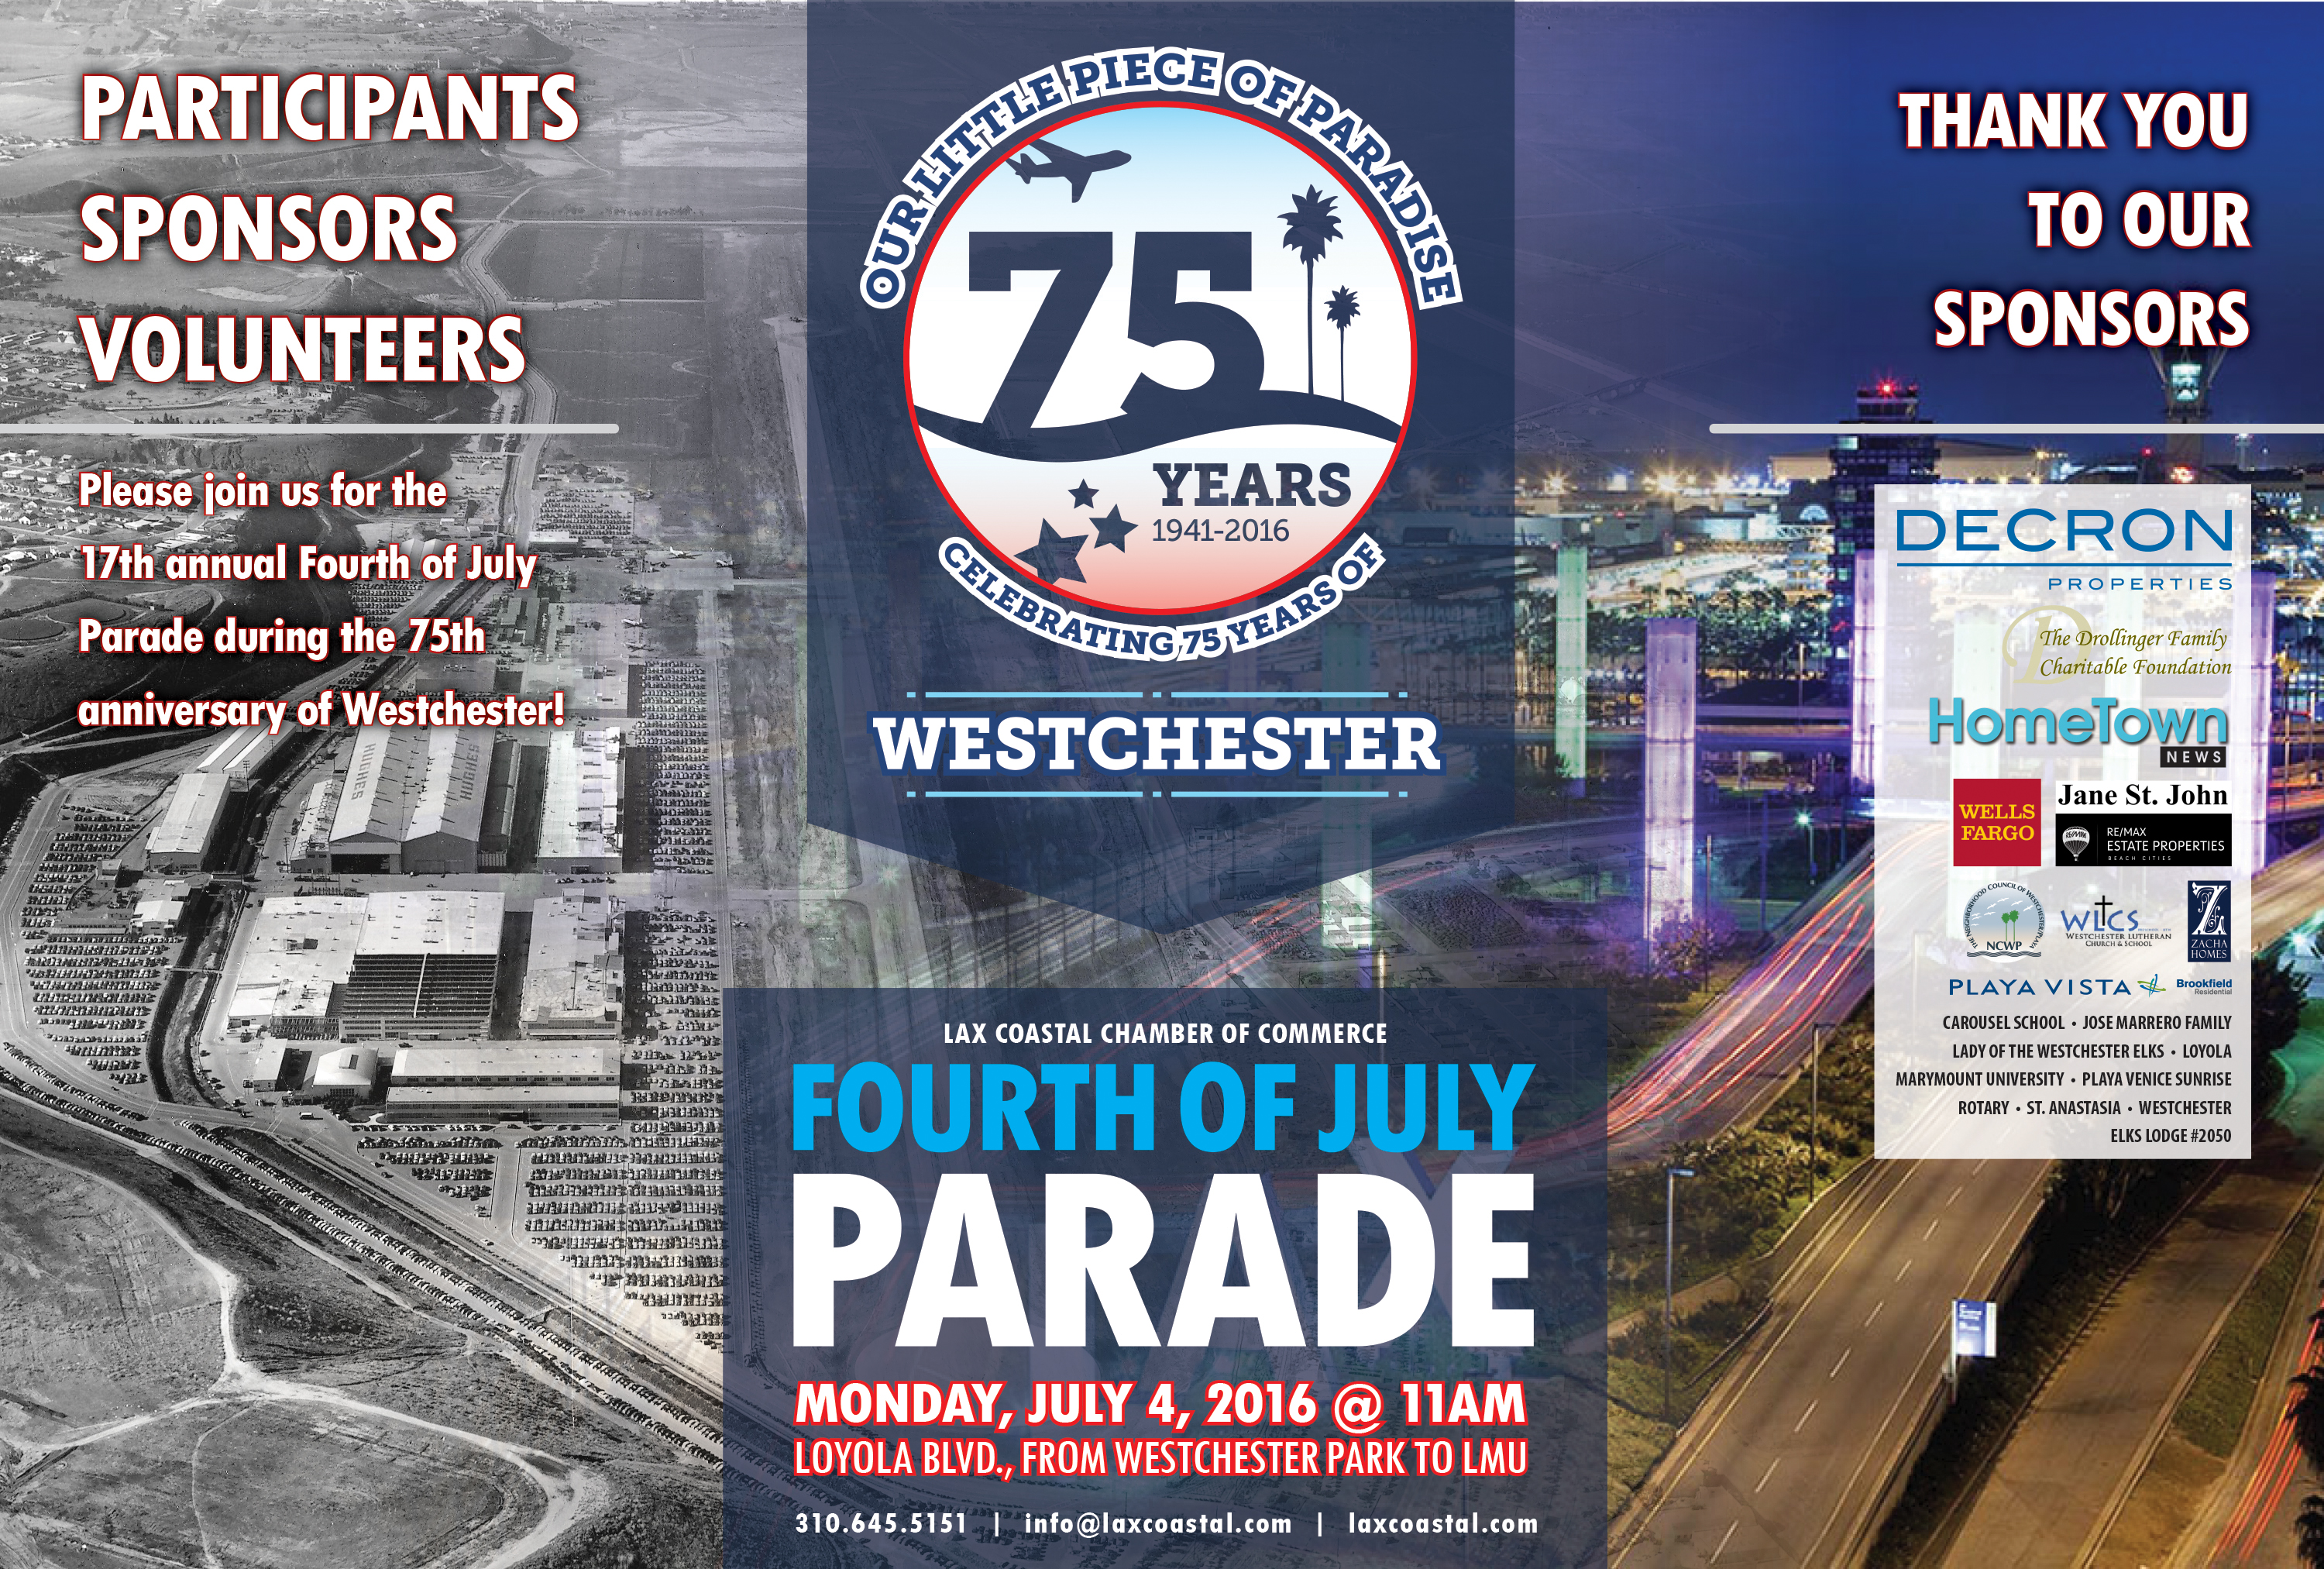 Calling all participants, volunteers and sponsors! It’s parade time!